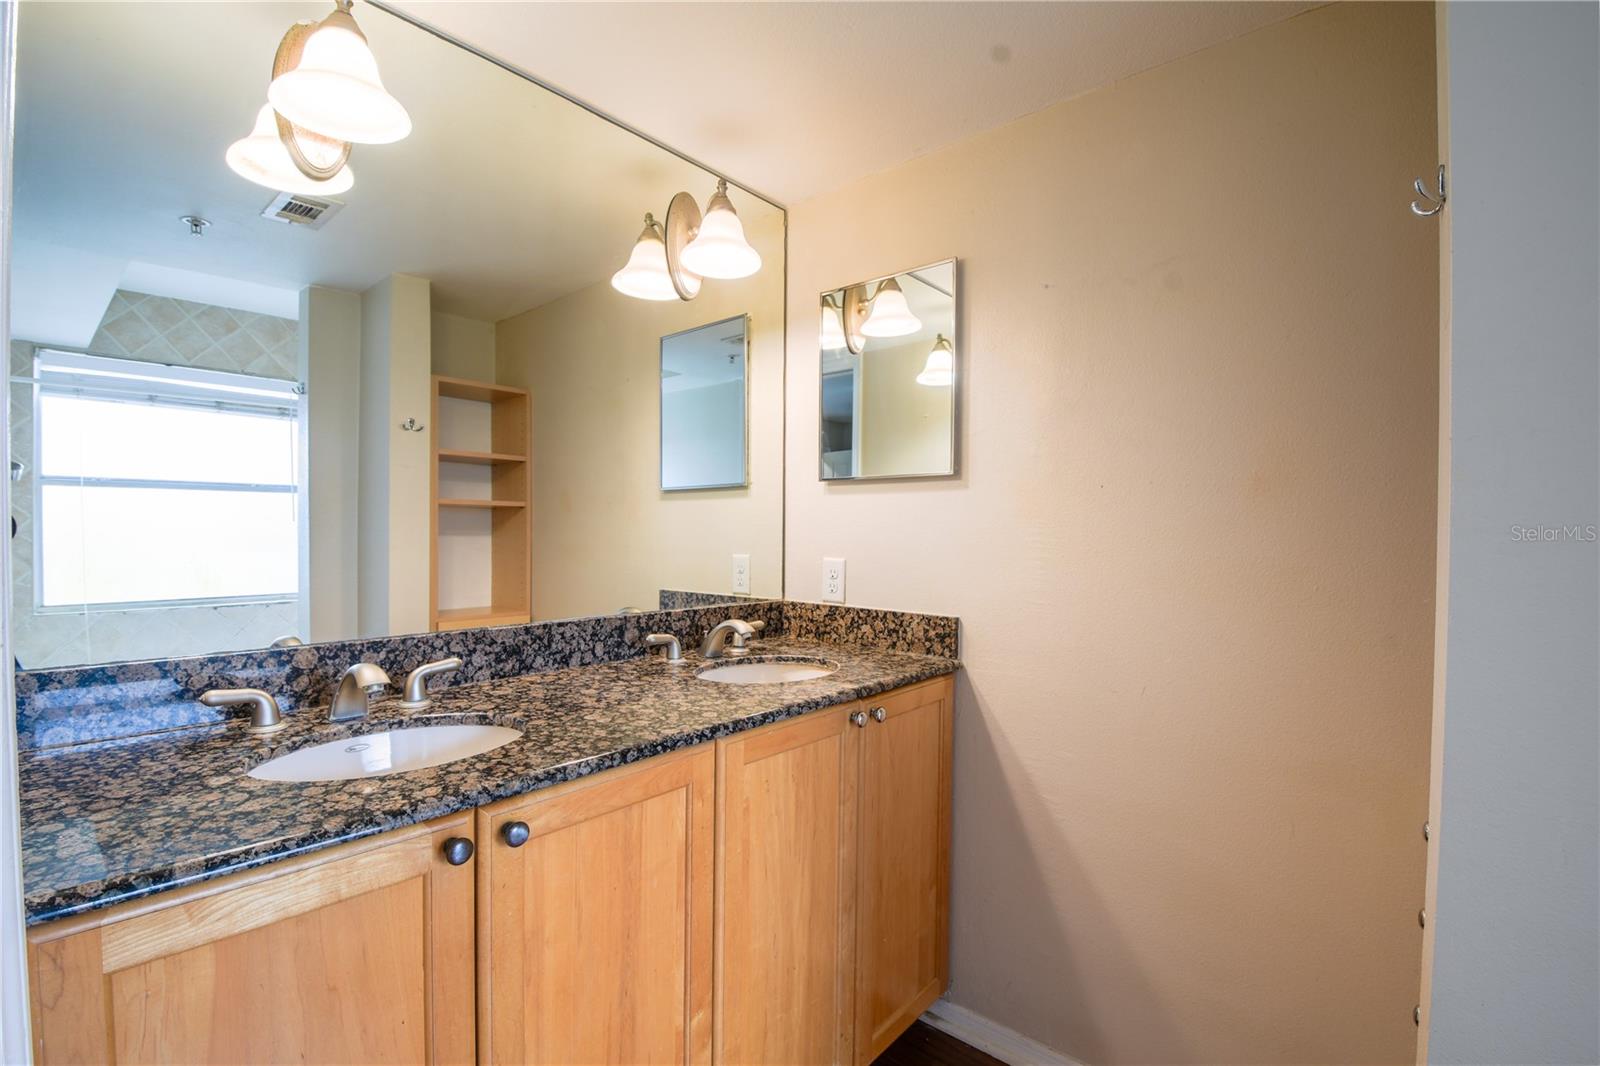 The primary bathroom has a mirrored dual sink vanity with downlight fixtures.